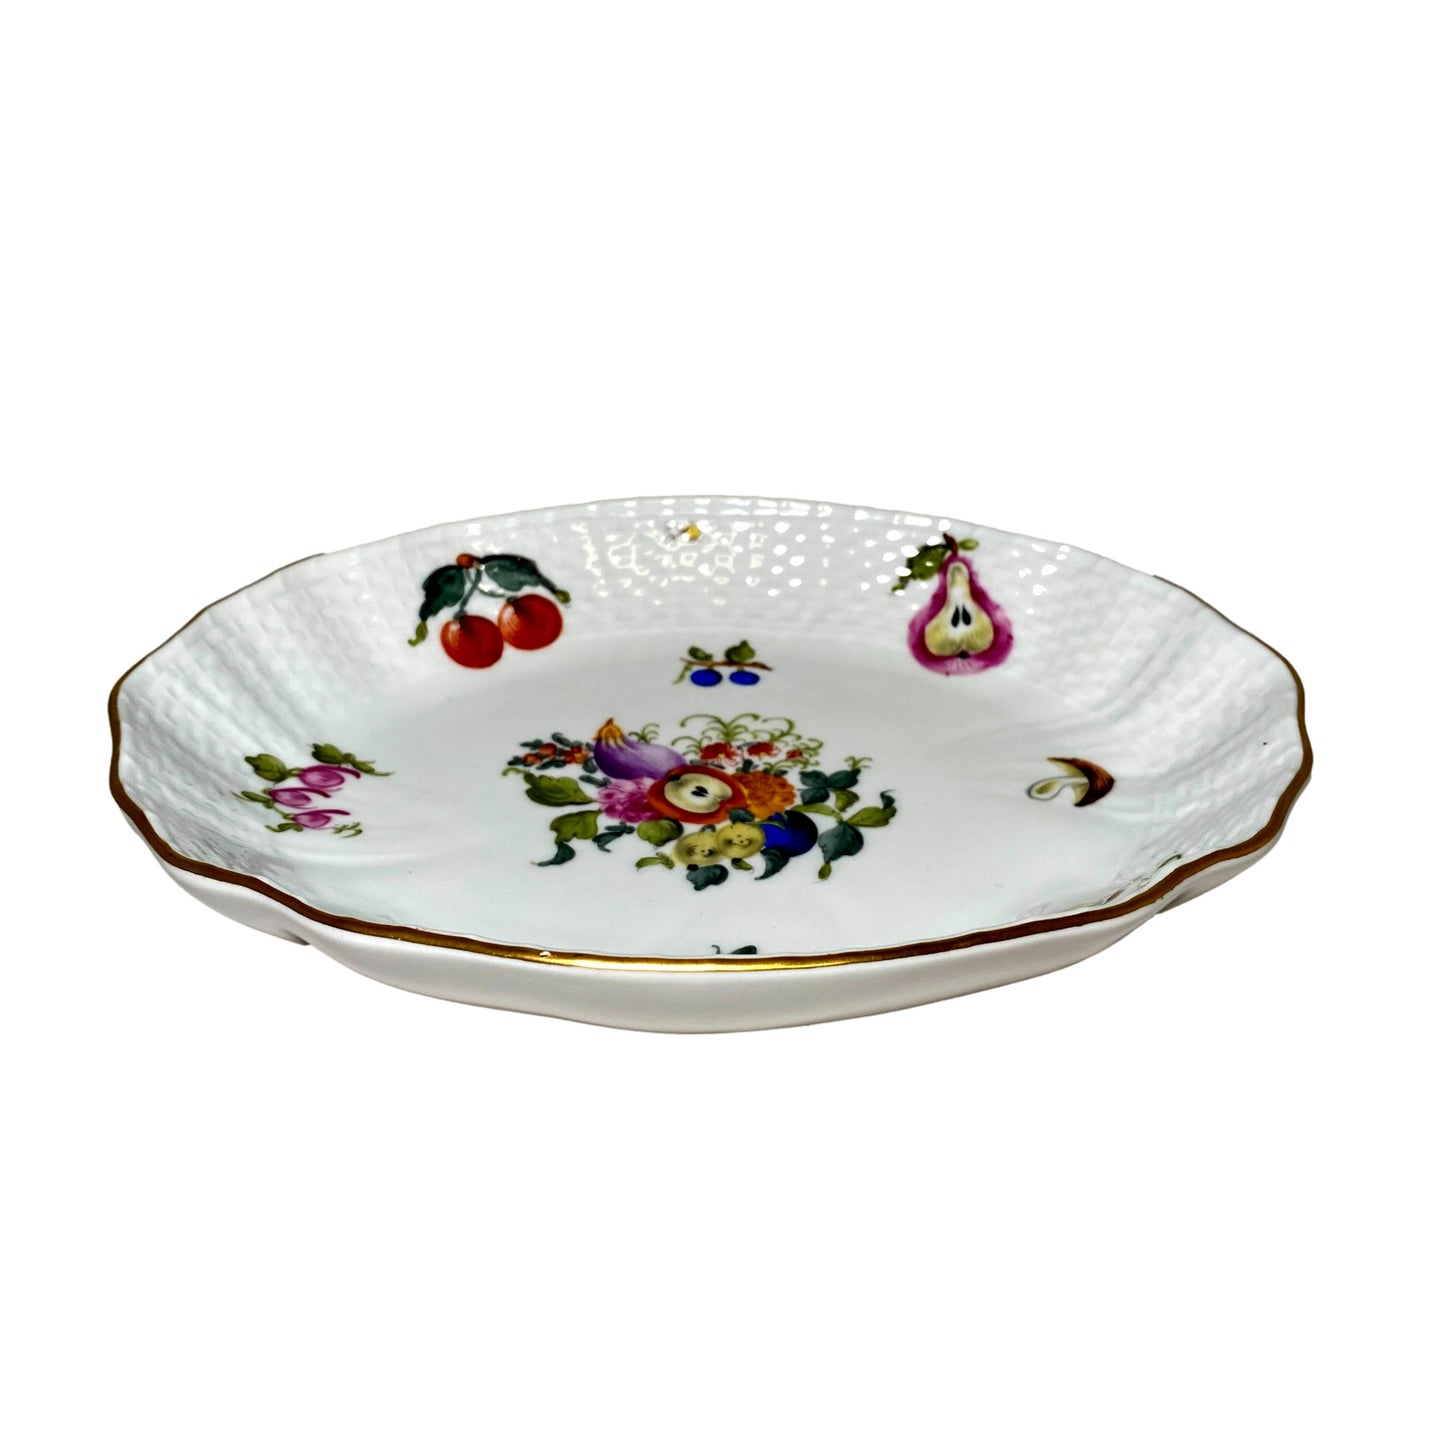 Herend Fruits And Flowers Oval Dish